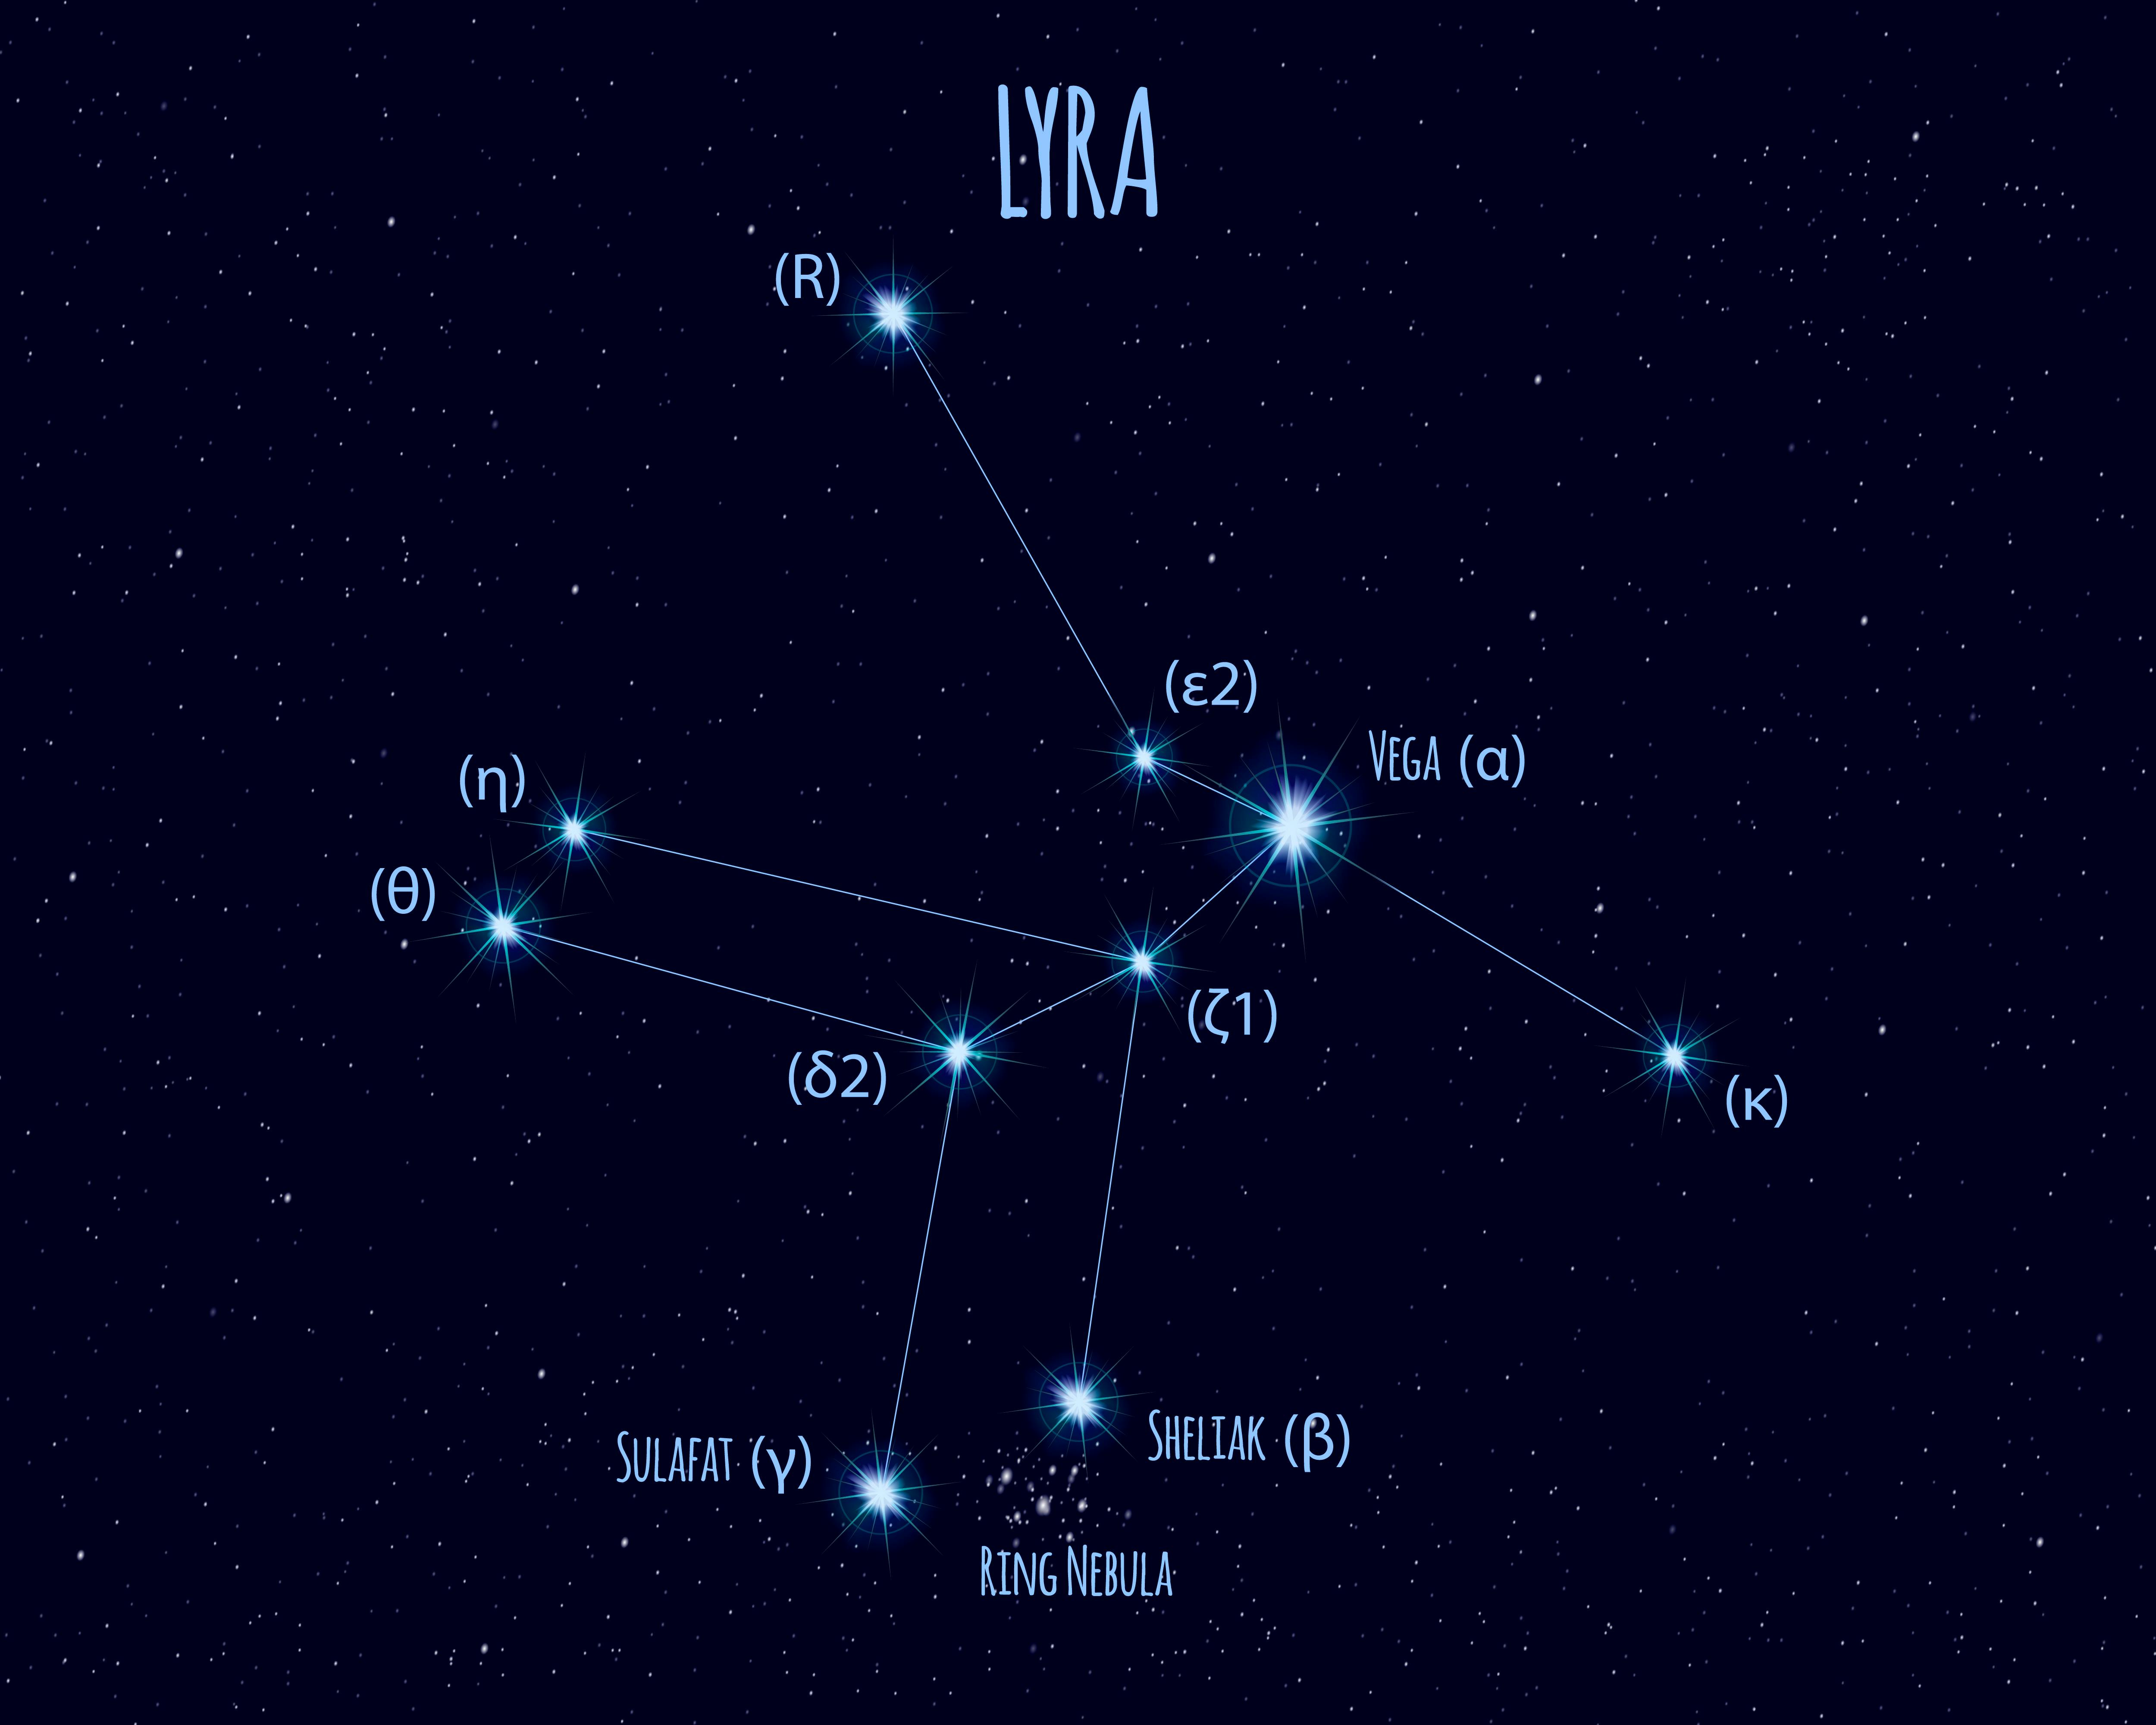 ATLANTIC SKIES Learn about Lyra: Constellation includes Vega and